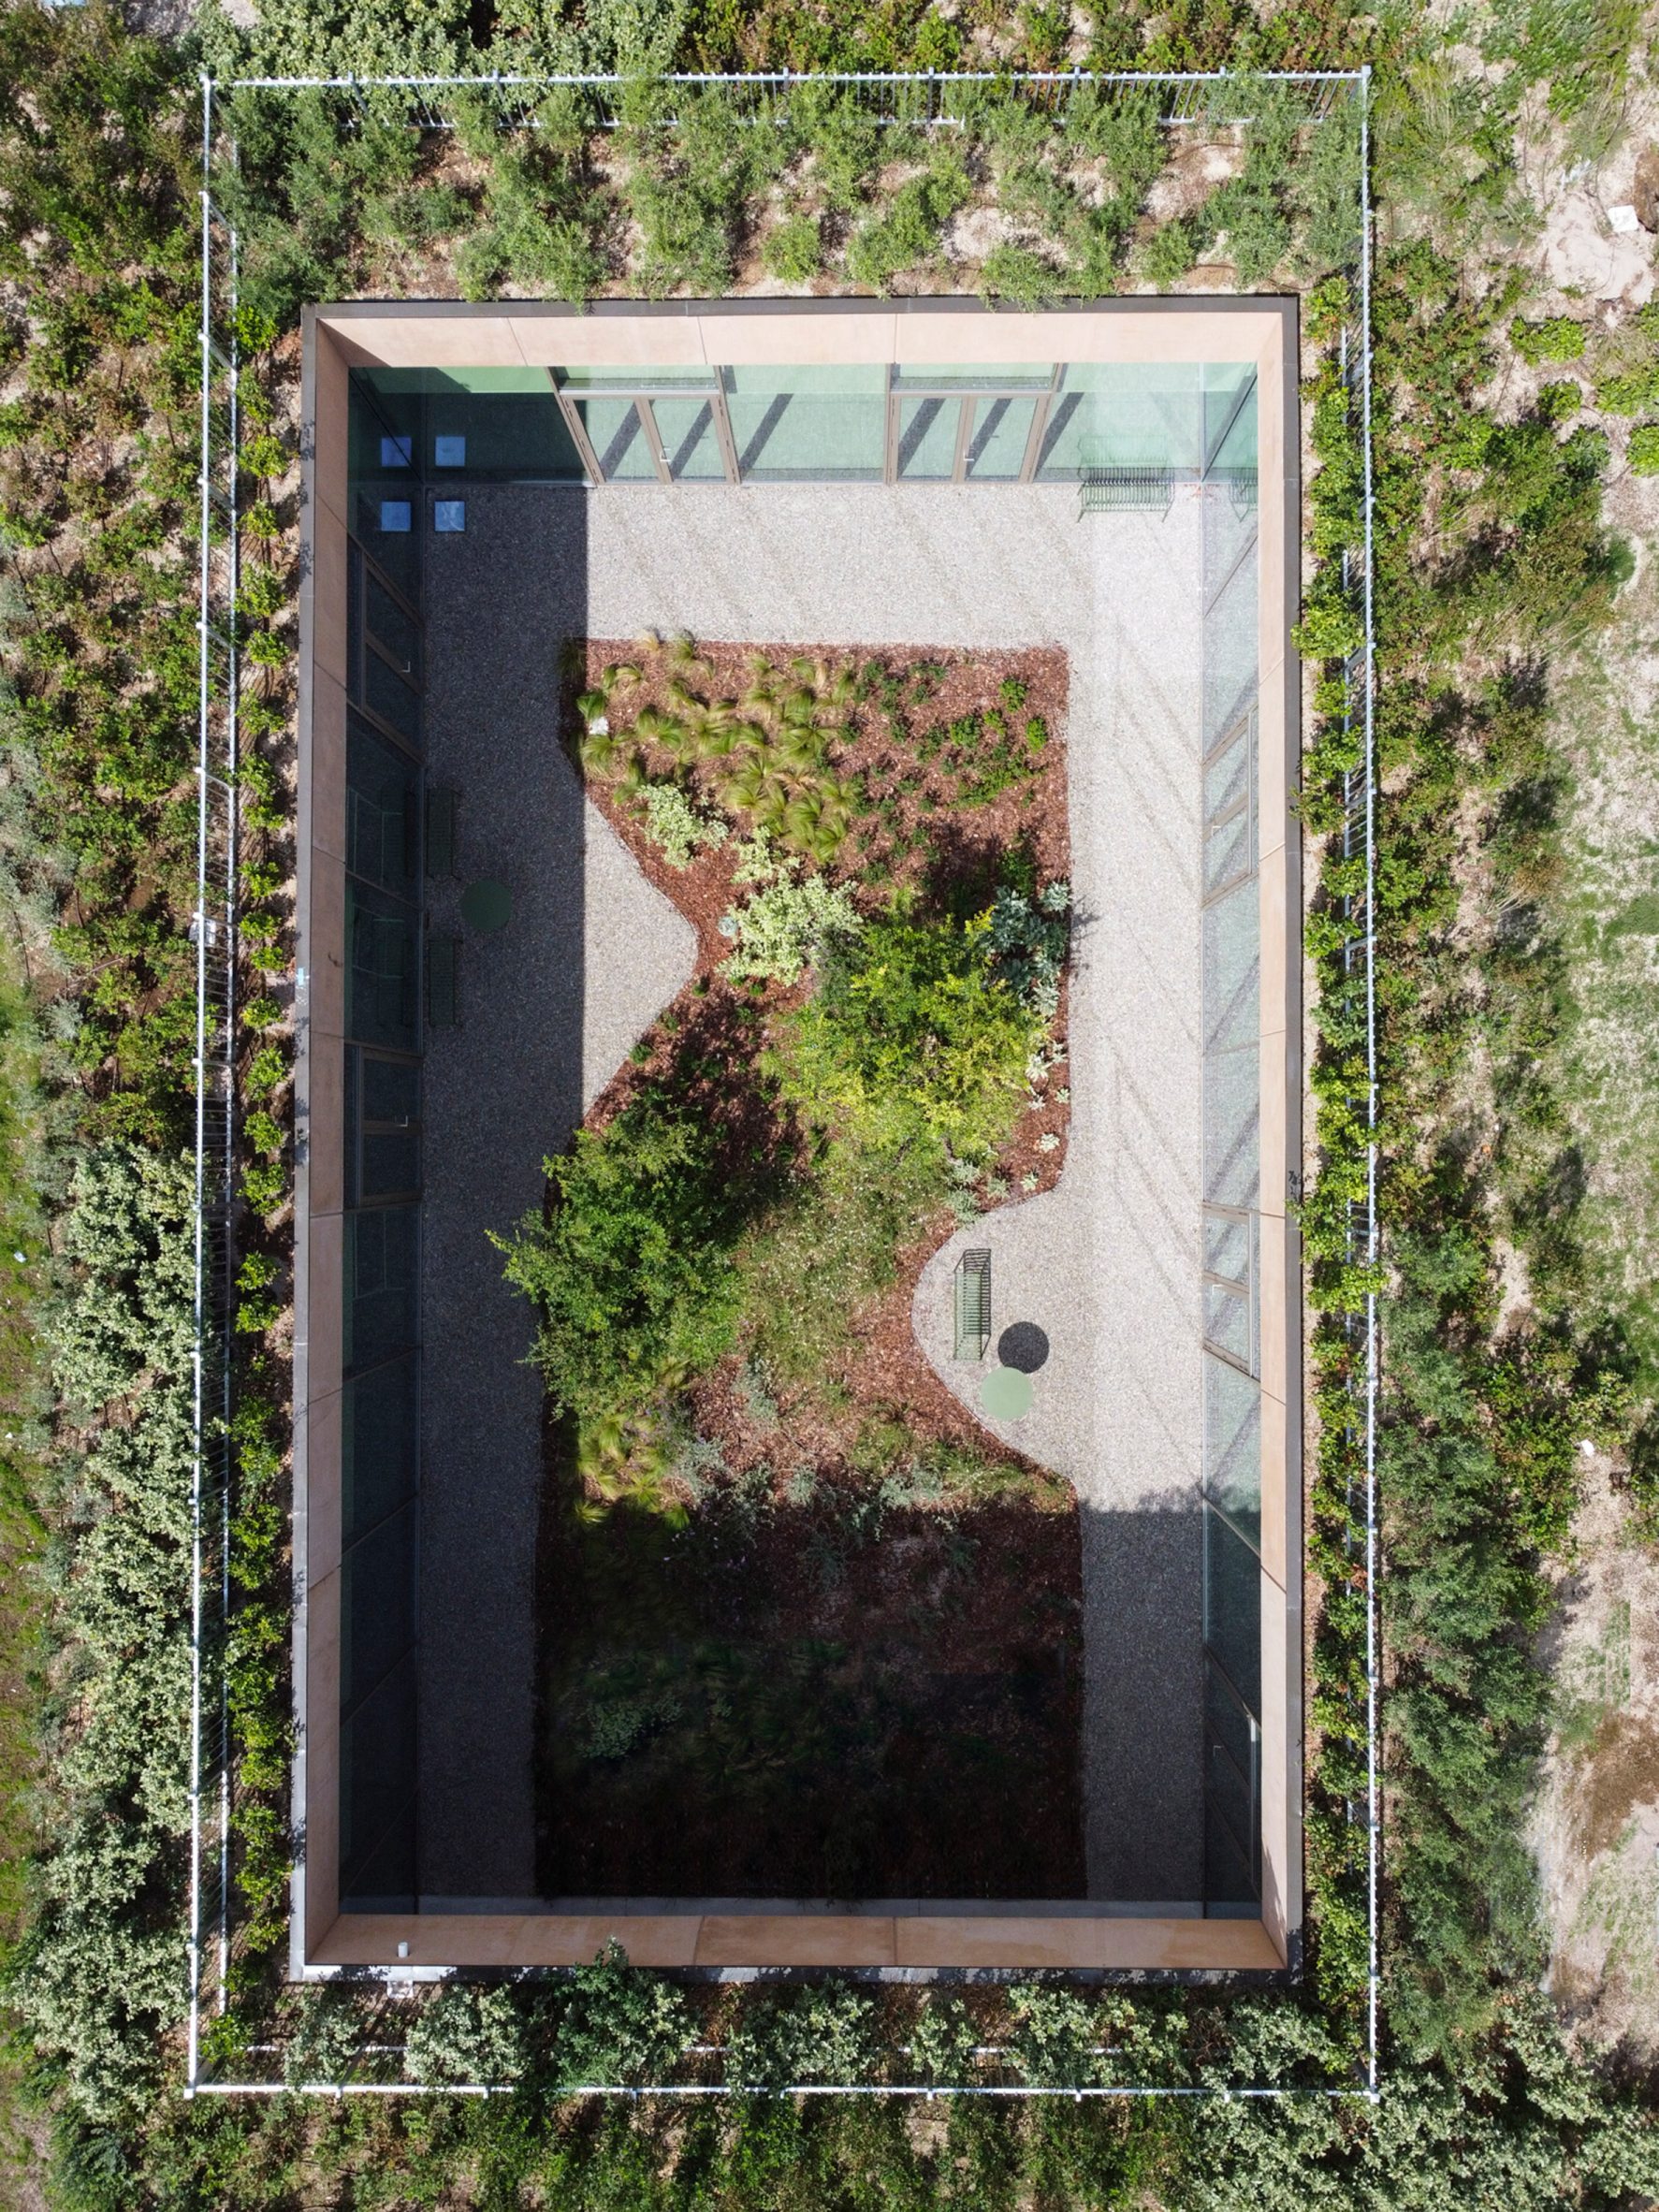 Bird's eye view of the Fendi factory green roof